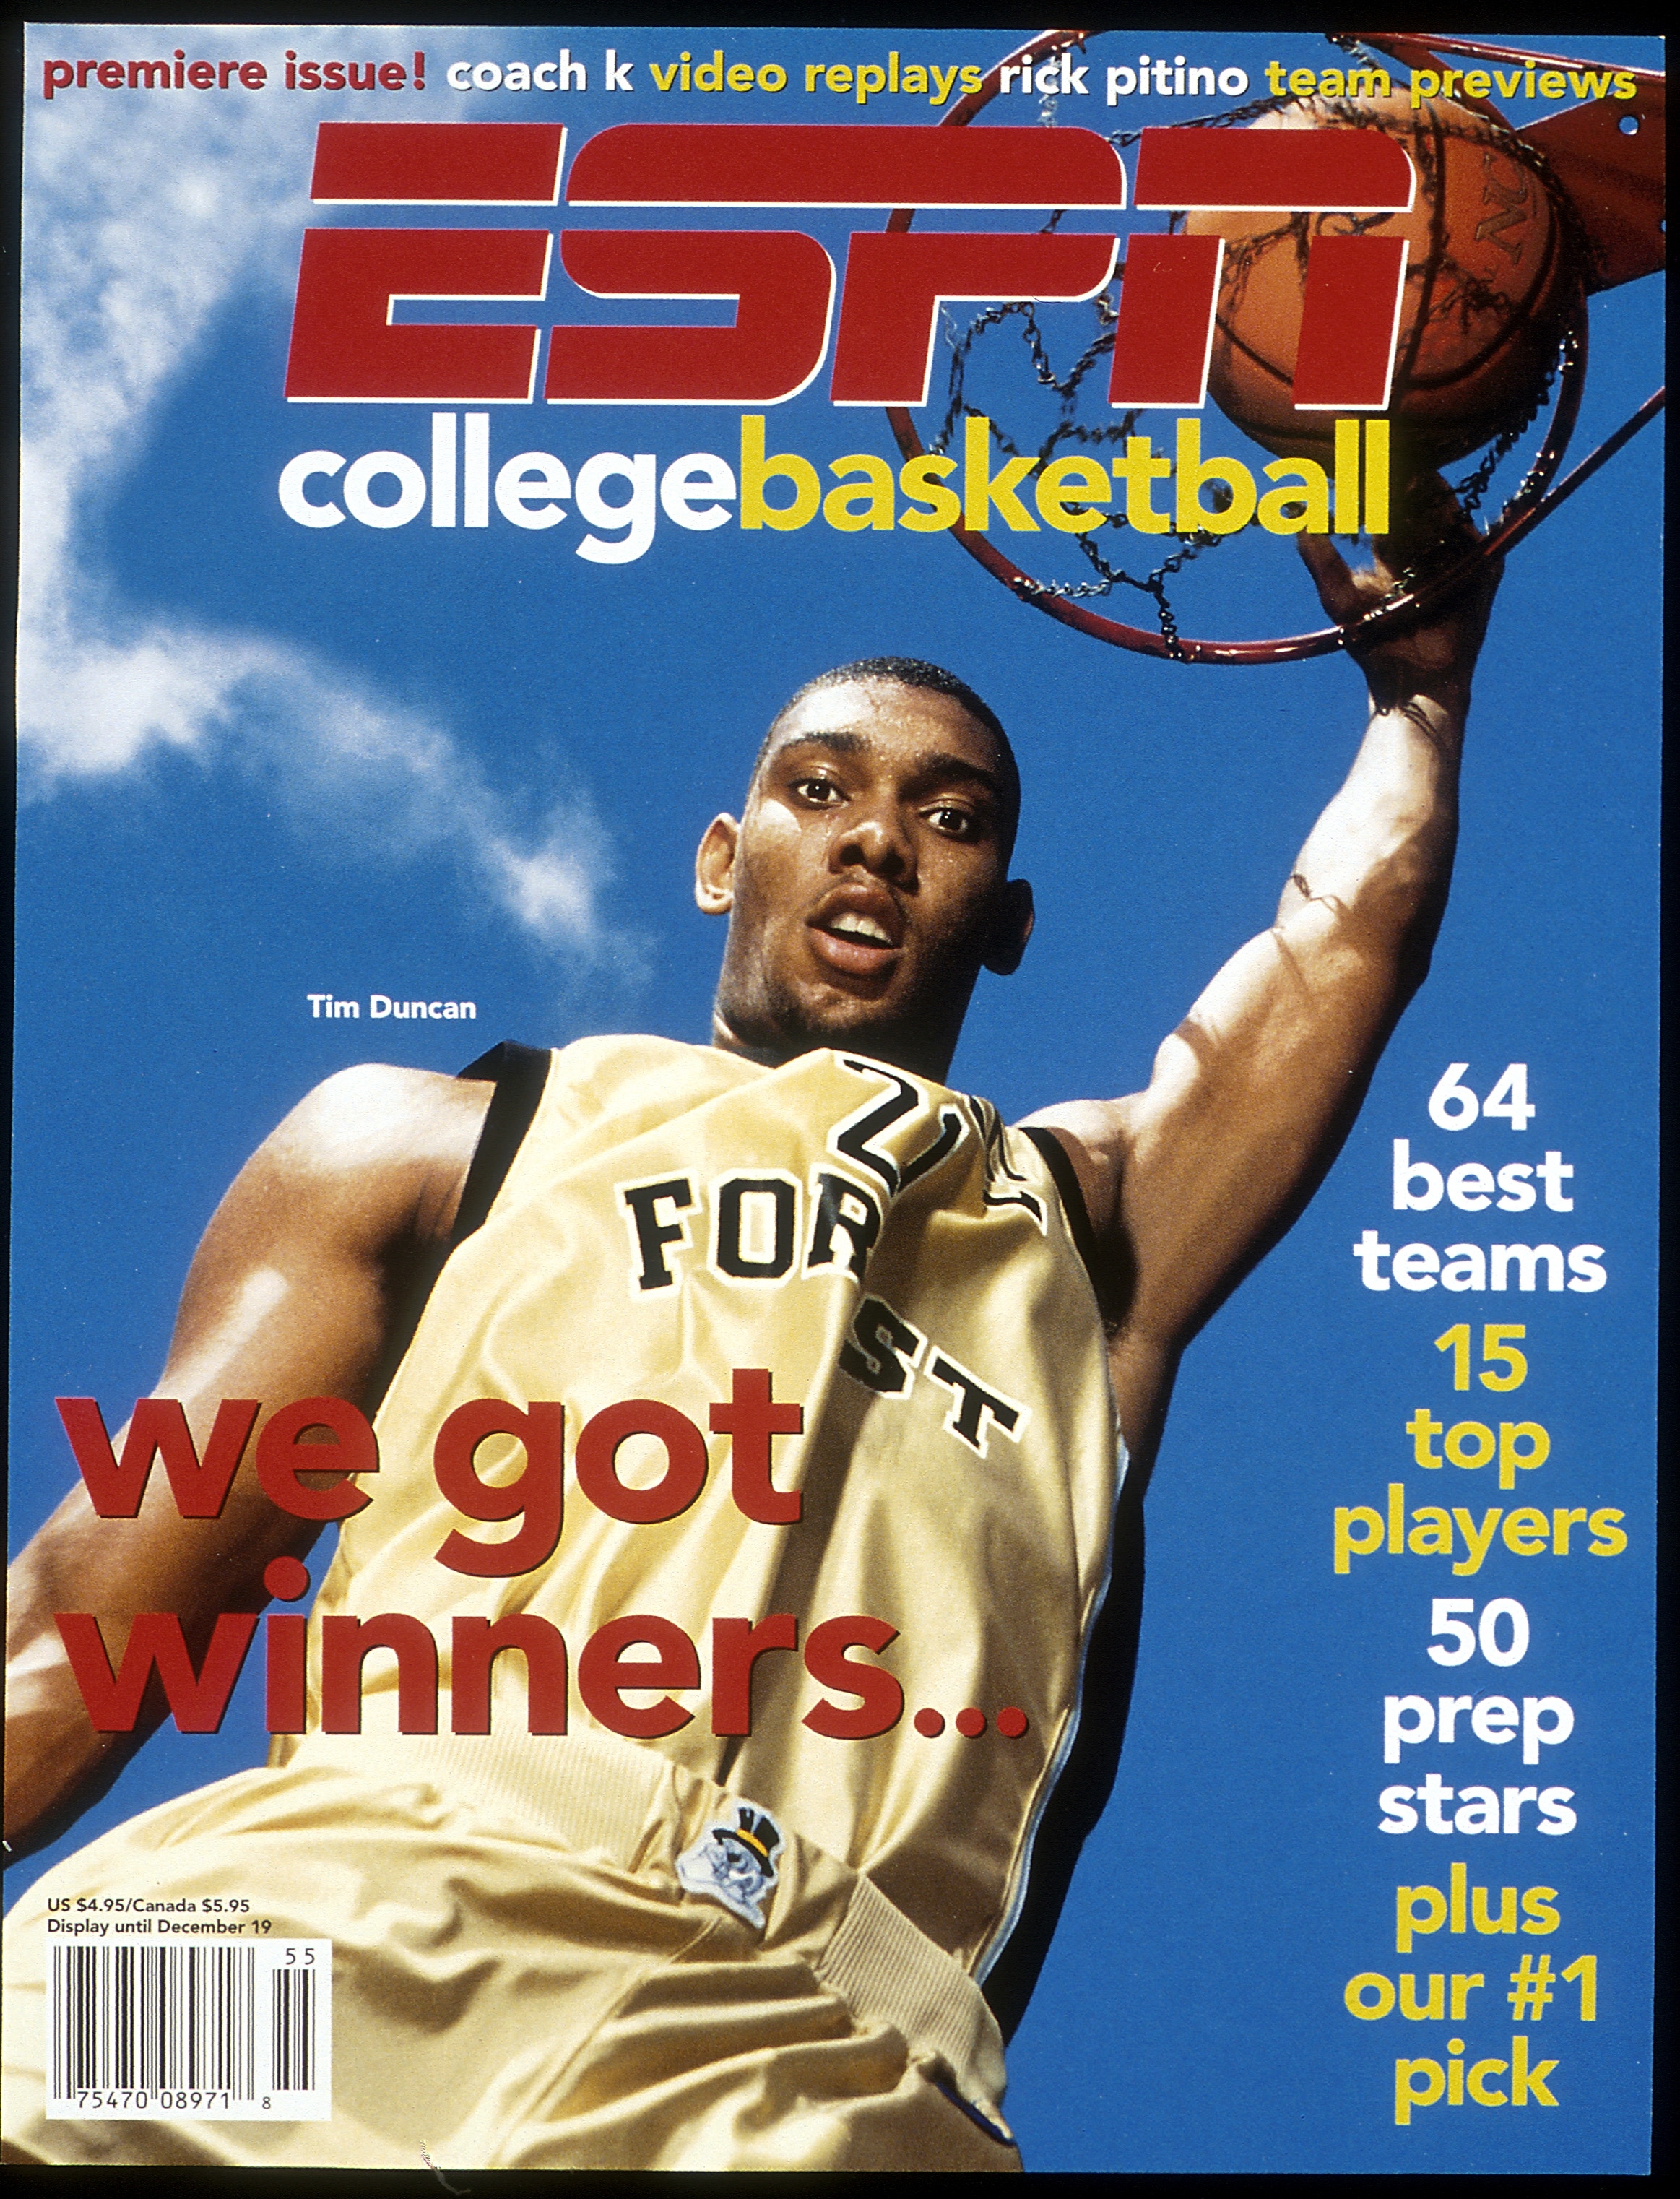 Wake Forest’s Tim Duncan peers from a cover of the 1995 ESPN College Basketball preview issue.